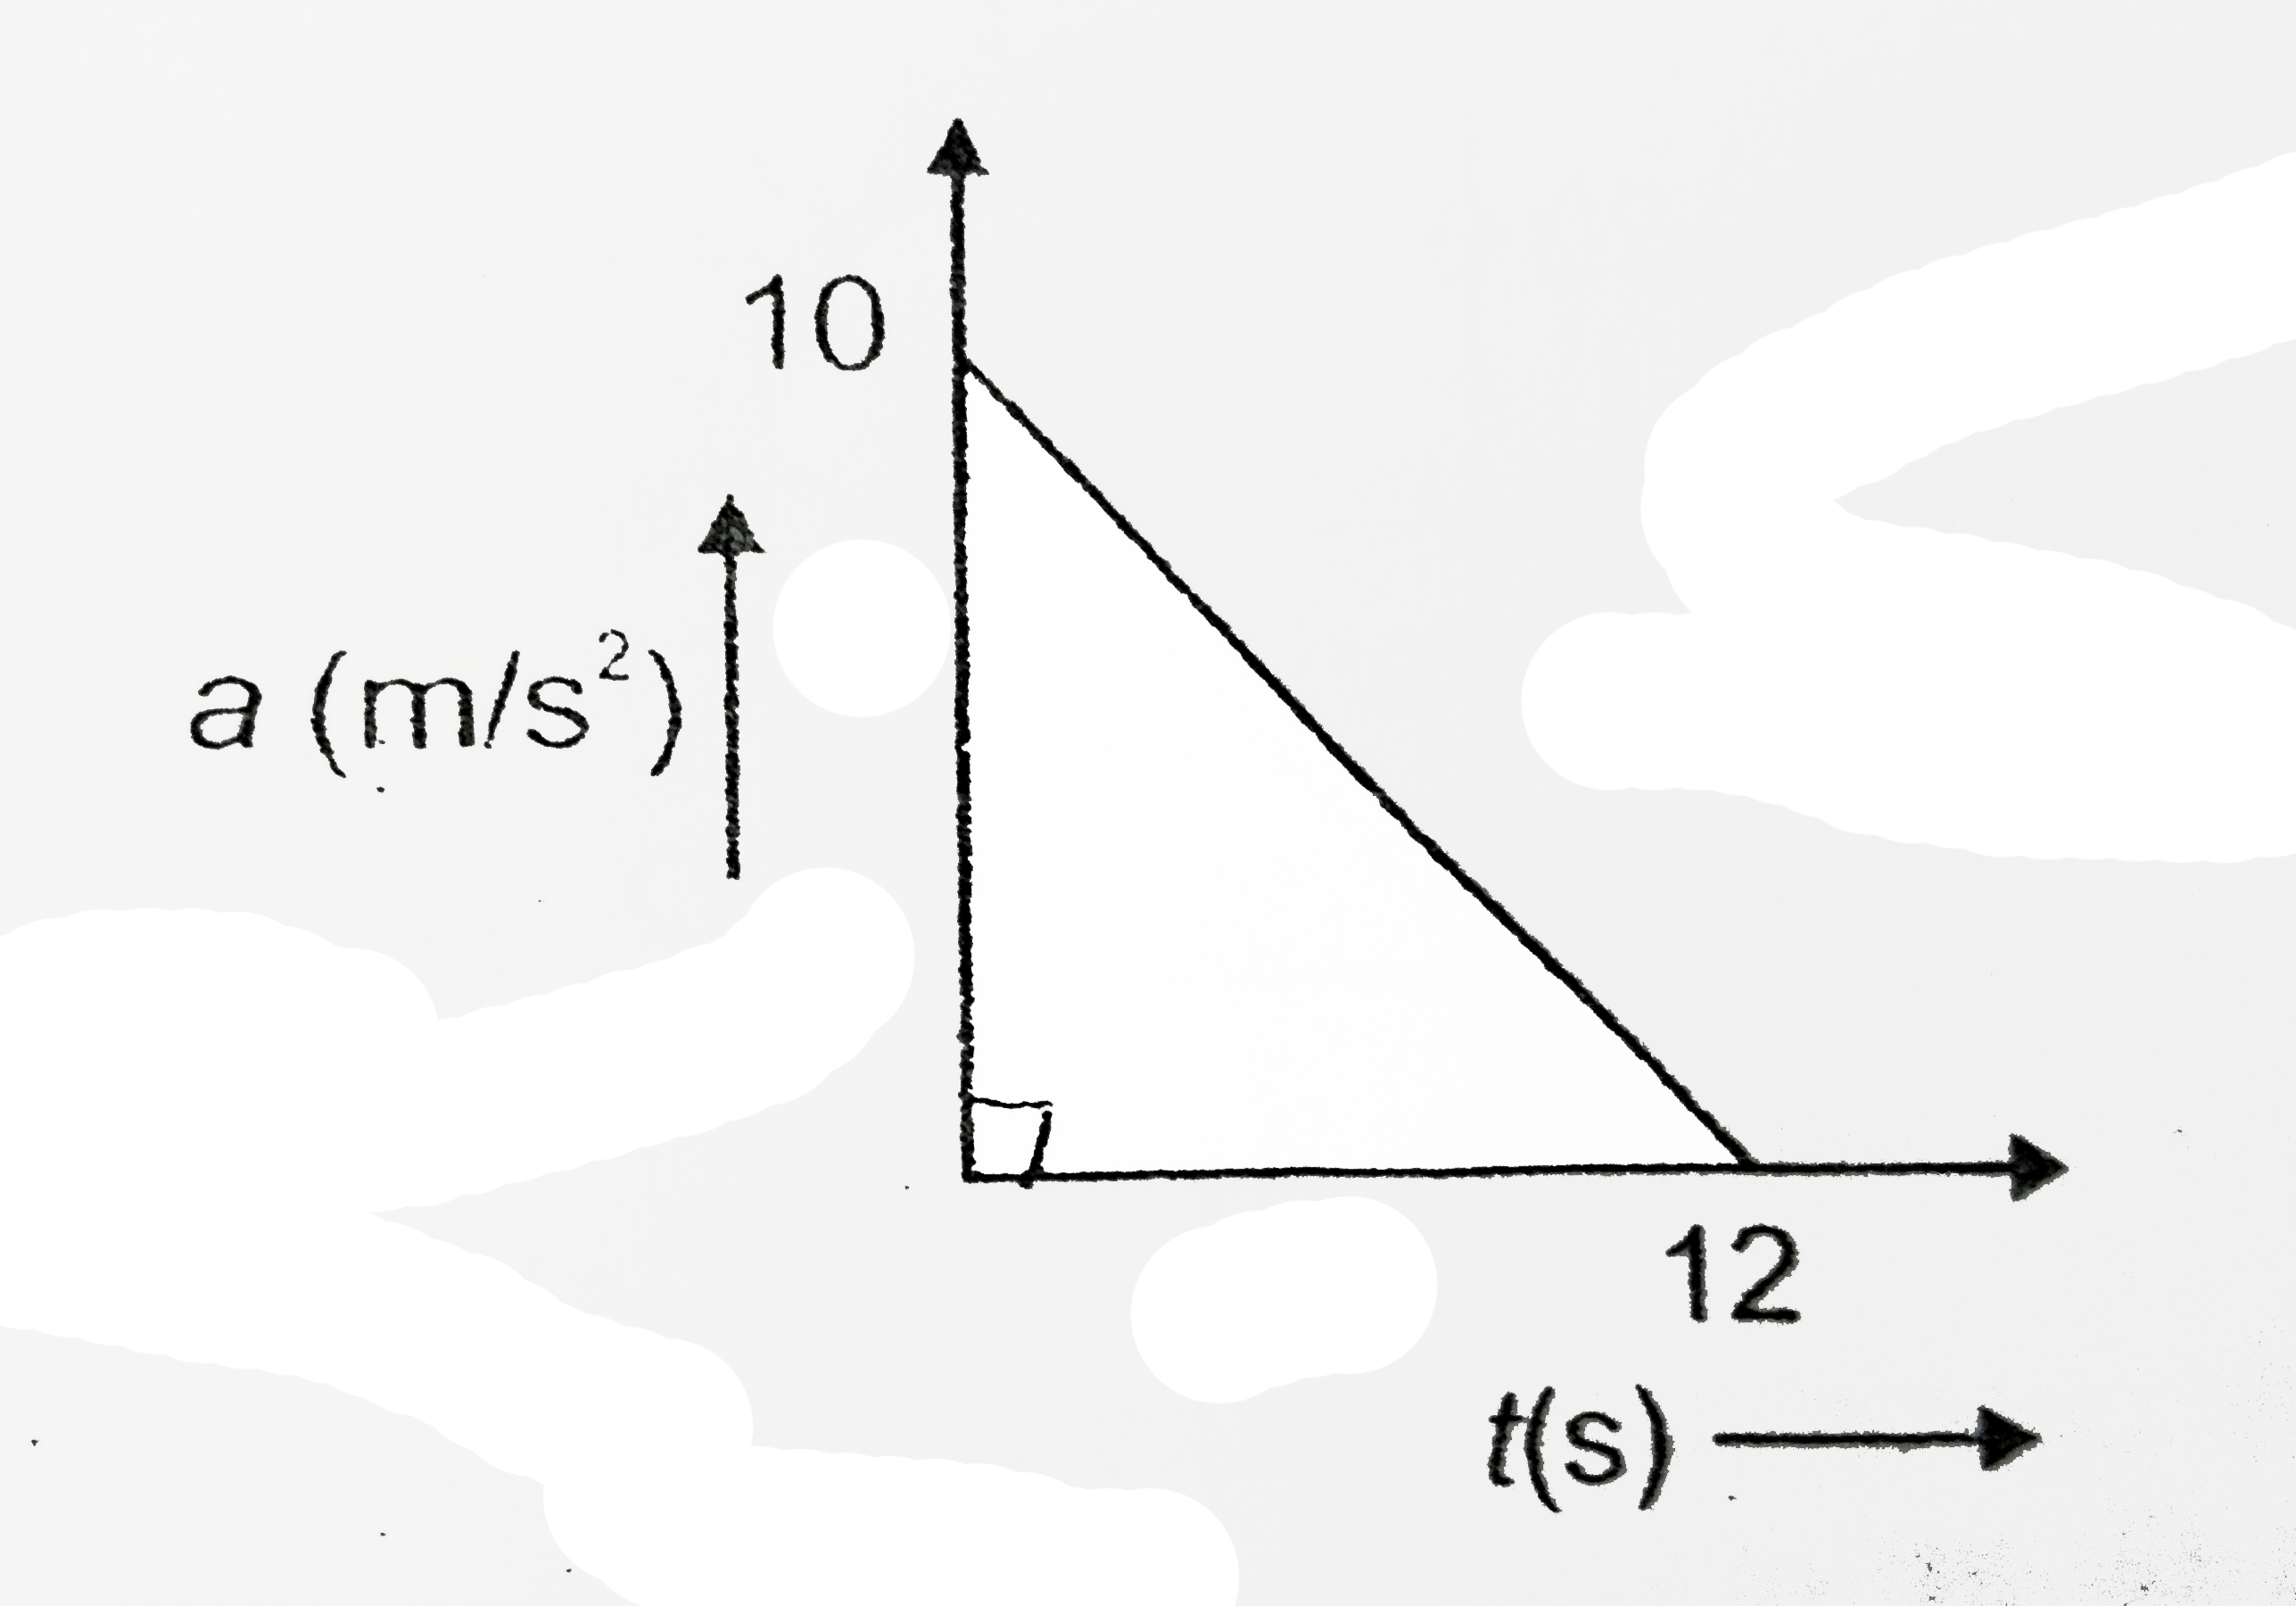 A particle starting from rest undergoes a rectilinear motion with acceleration a. The variation of a with time t is shown below. The maximum velocity attained by the particle during its motion is